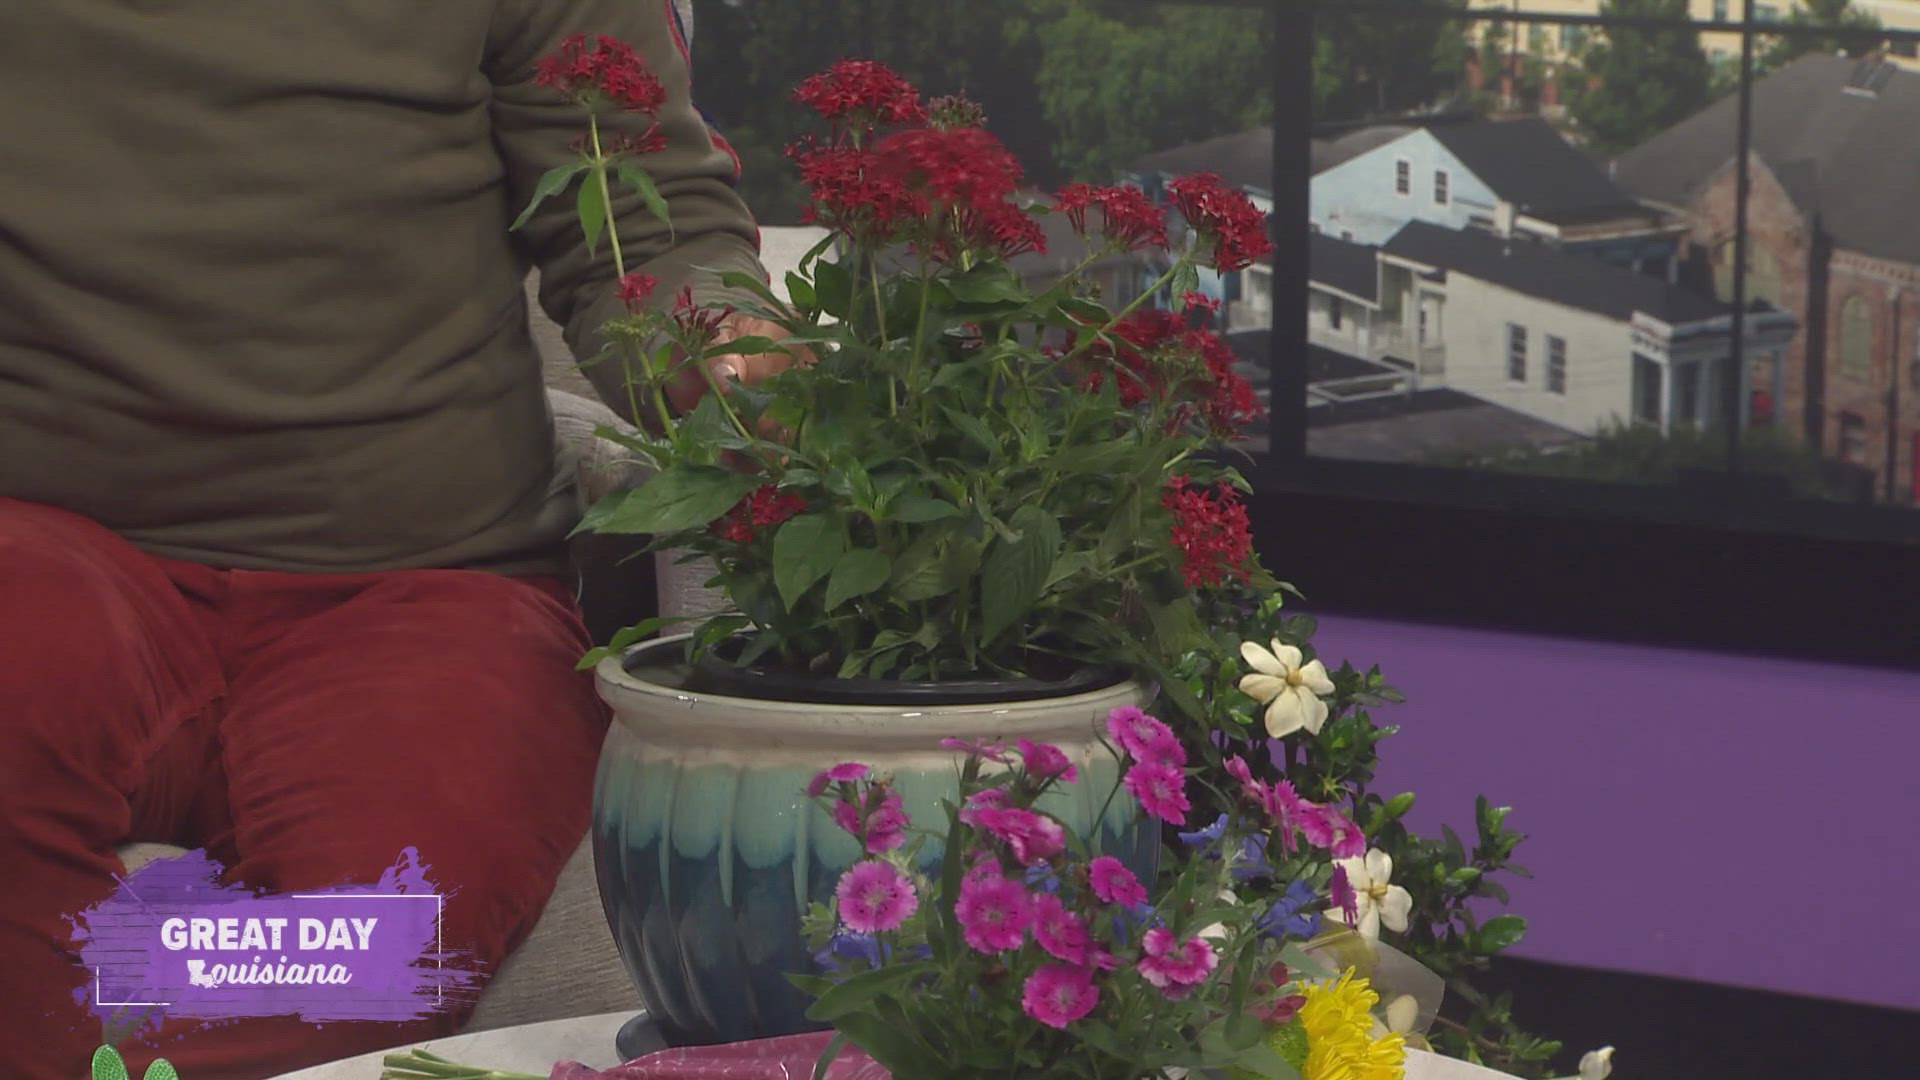 We learn about some good cut flowers and living plants to give to mom this Mother's Day.